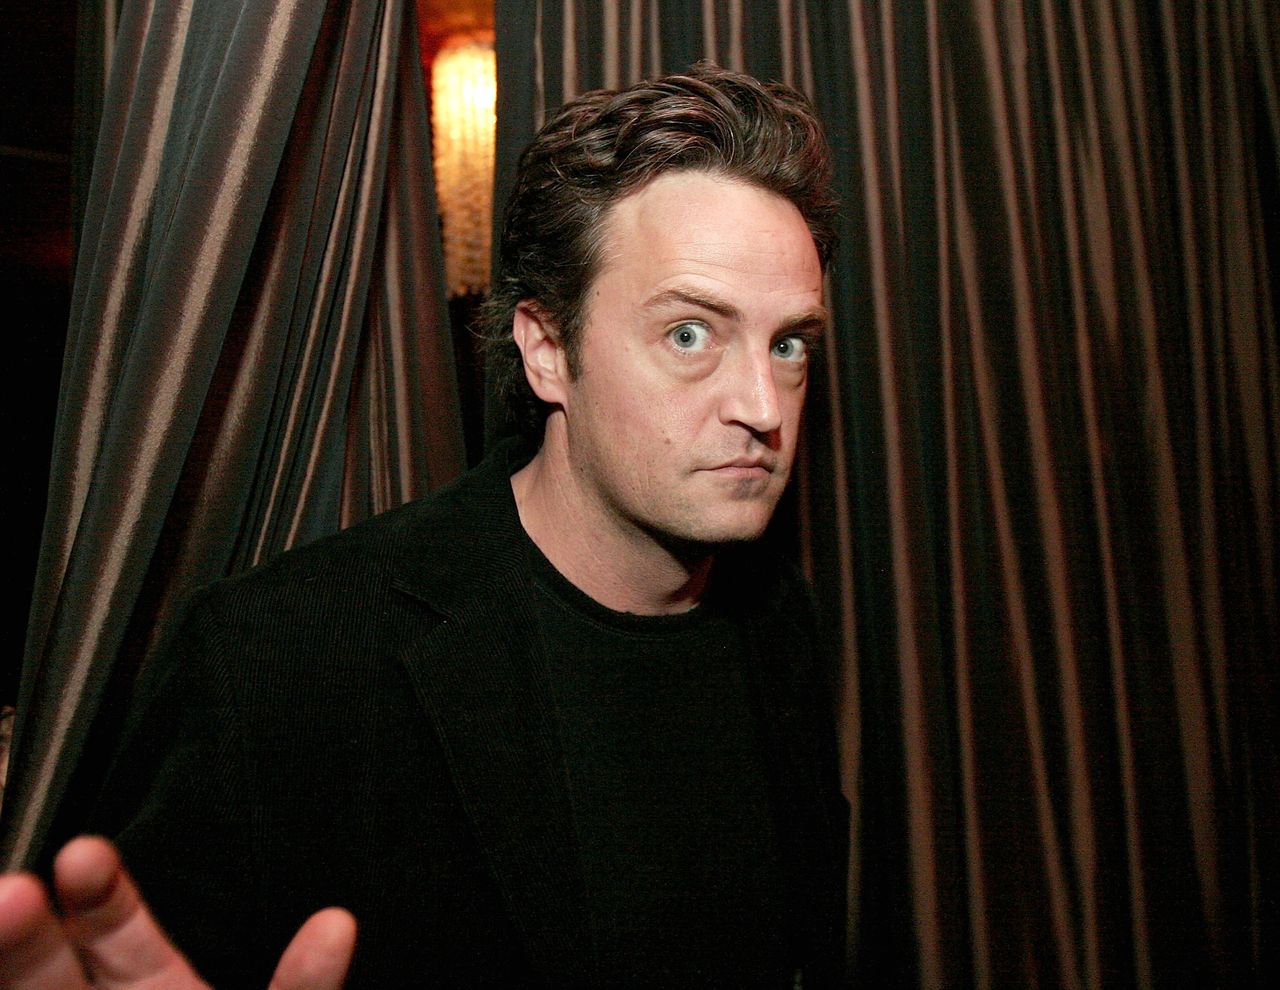 Charges likely in Matthew Perry death investigation nearing conclusion